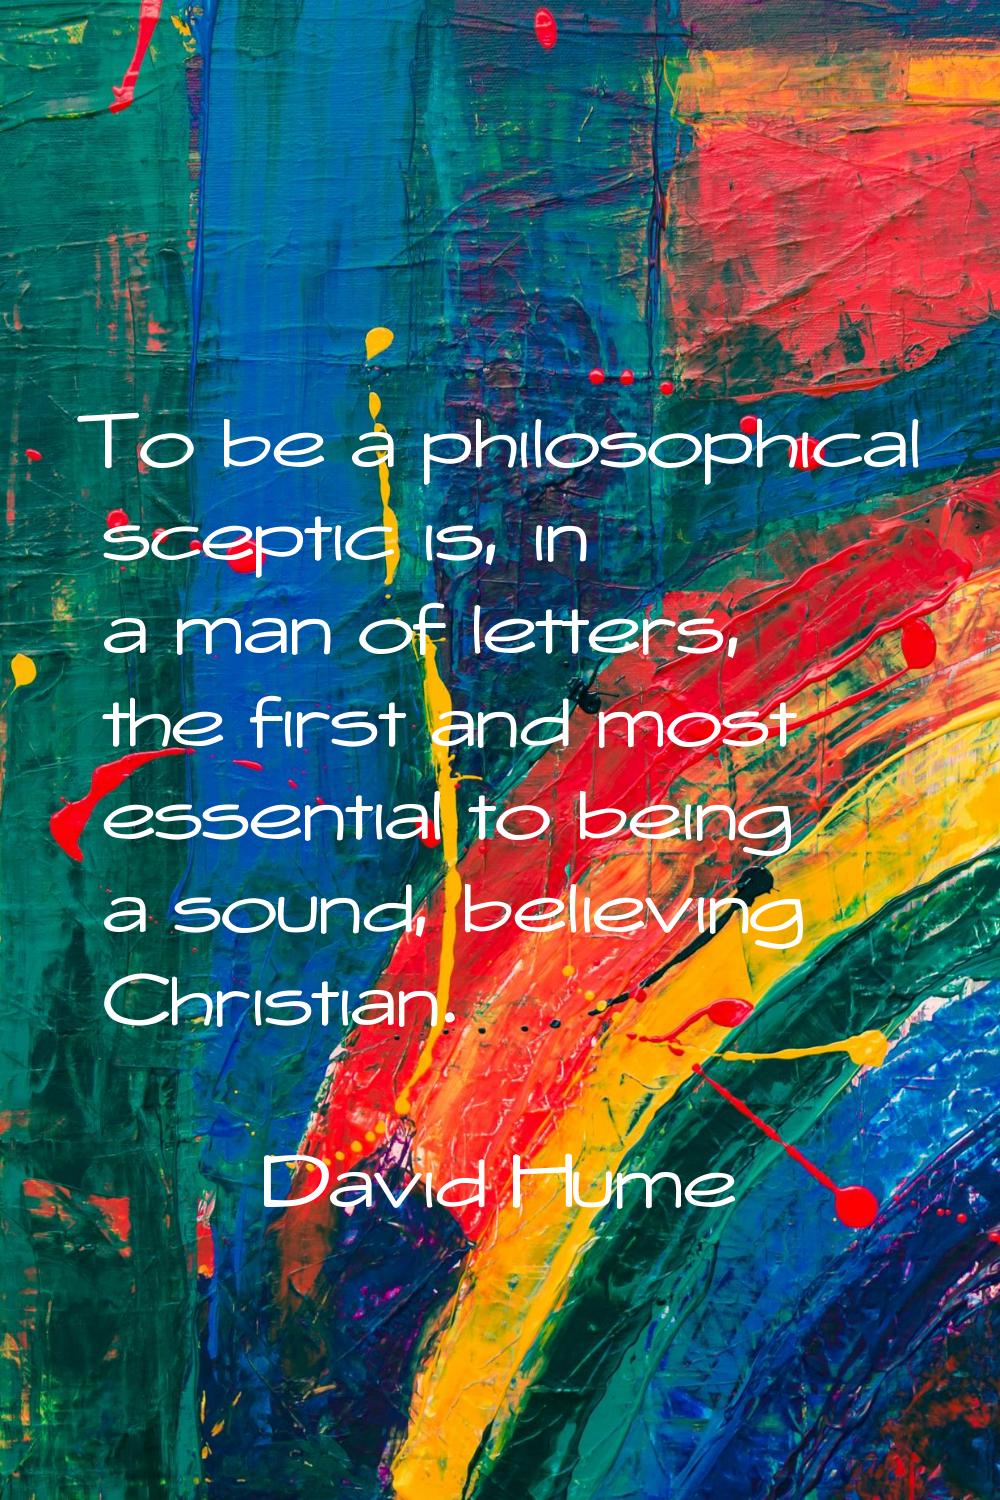 To be a philosophical sceptic is, in a man of letters, the first and most essential to being a soun